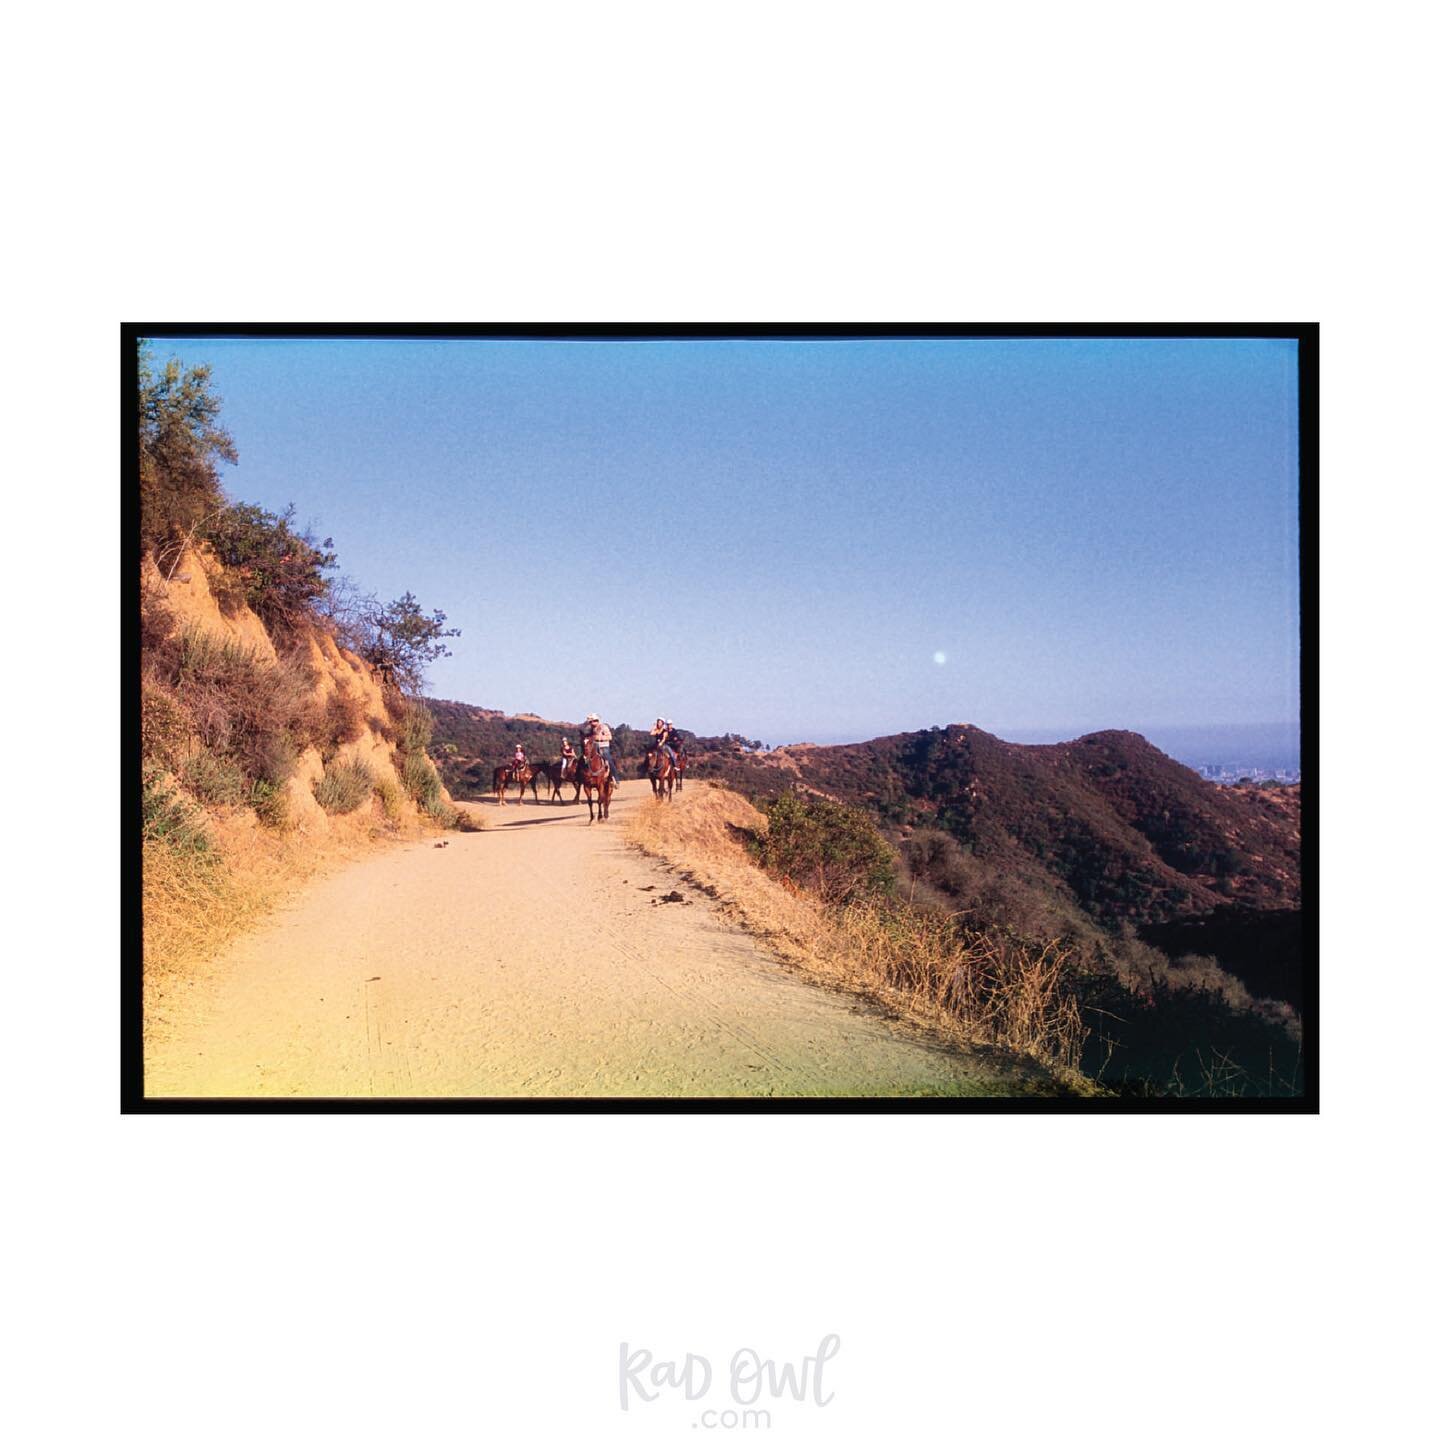 Fuji Velvia + Canon Rebel + Nikon Coolscan IV
June 2013 | Los Angeles, California
+
Looking back on them seven years later, this is probably my favorite frame from the roll. Which is yours?
+
Image description: People riding horses on the Griffith Pa